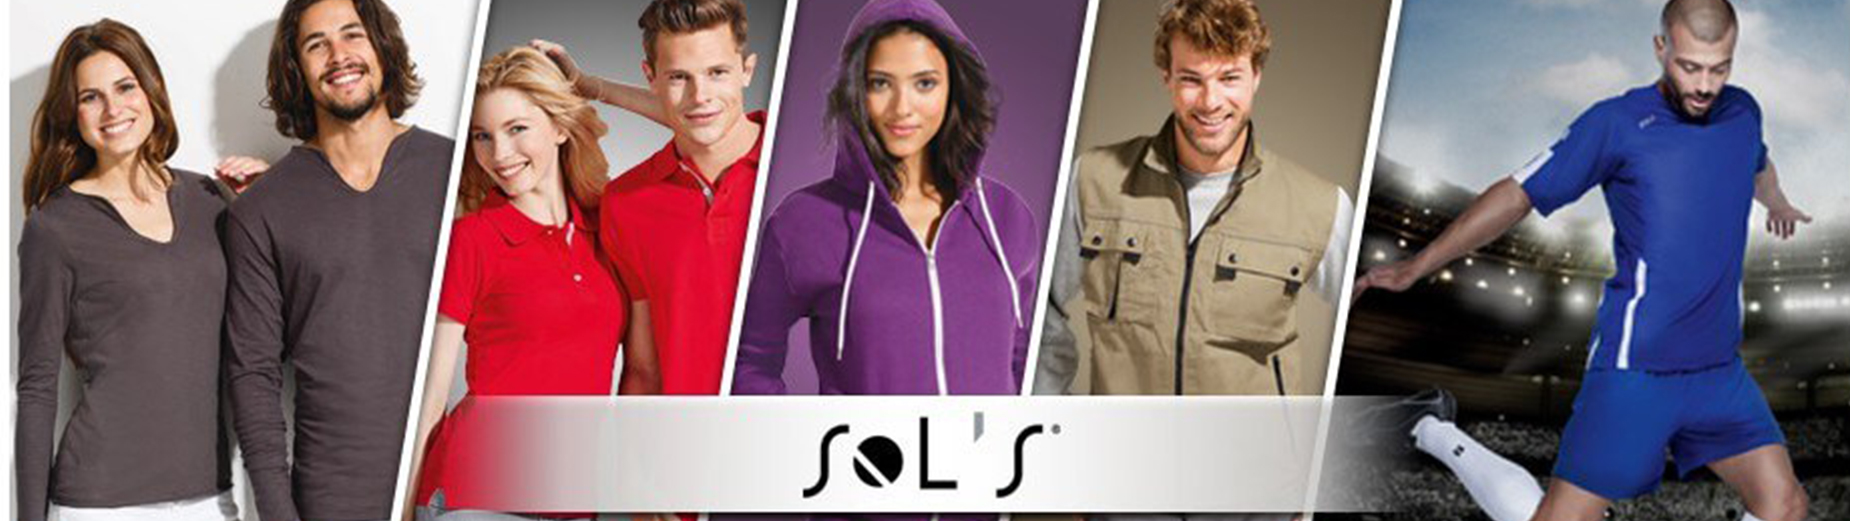 sol-s-collection